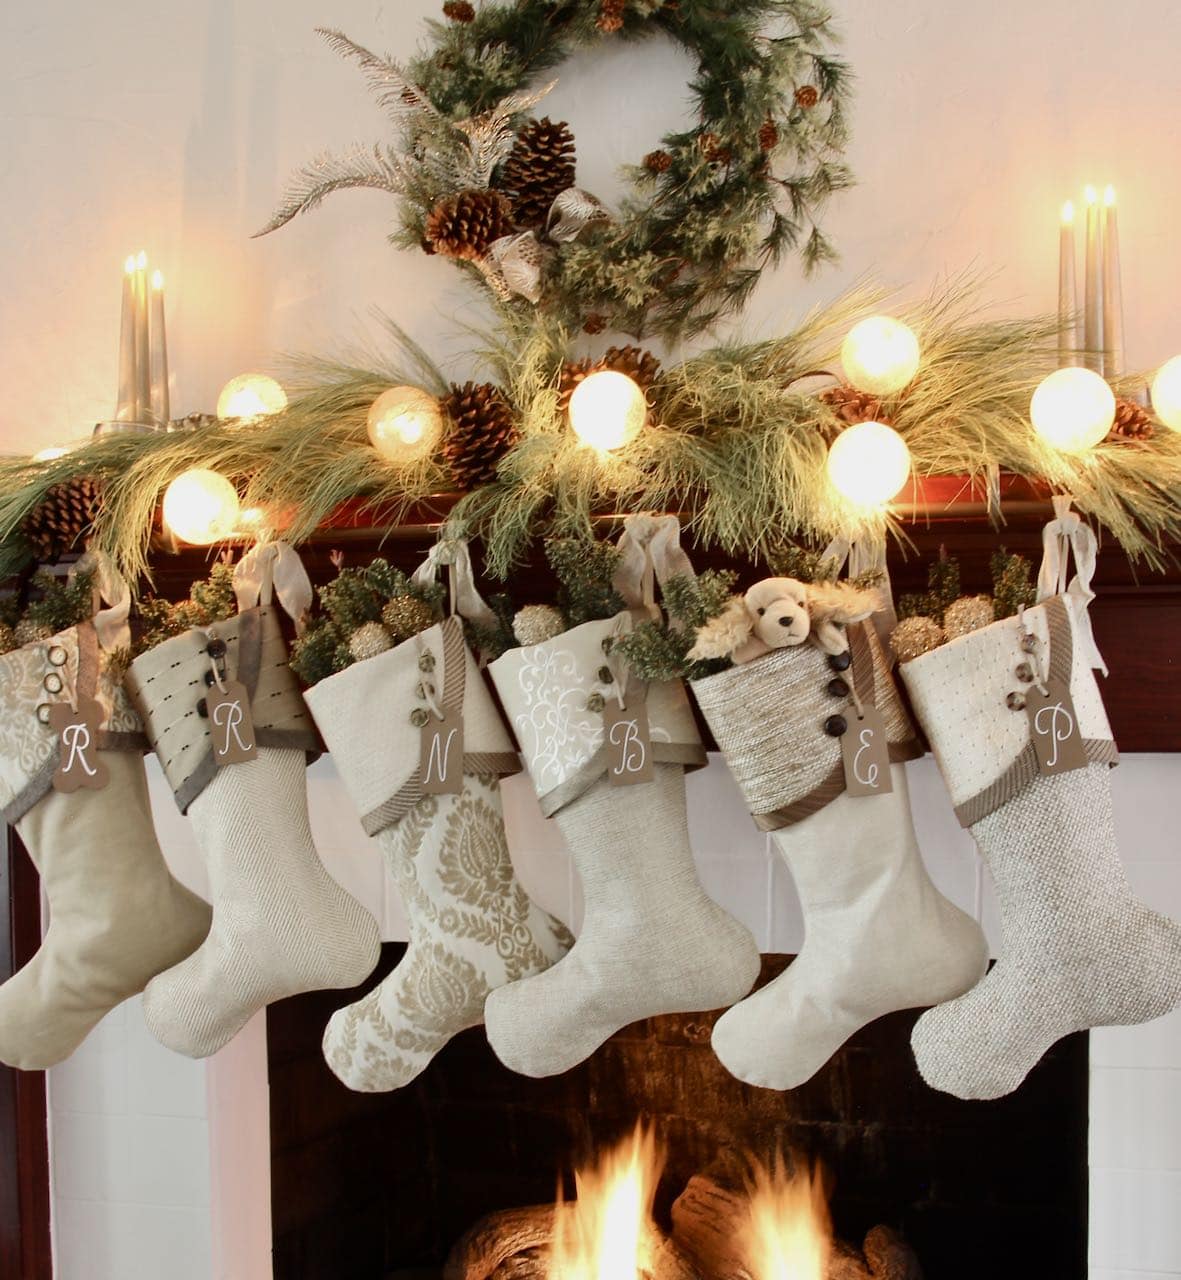 Six Warm Neutral Christmas Stockings with nutmeg initial name tags are hanging on a mantel with with simple green pine needles and globe lights, a wreath above flanked by three taper candles in s single vessel filled with sand